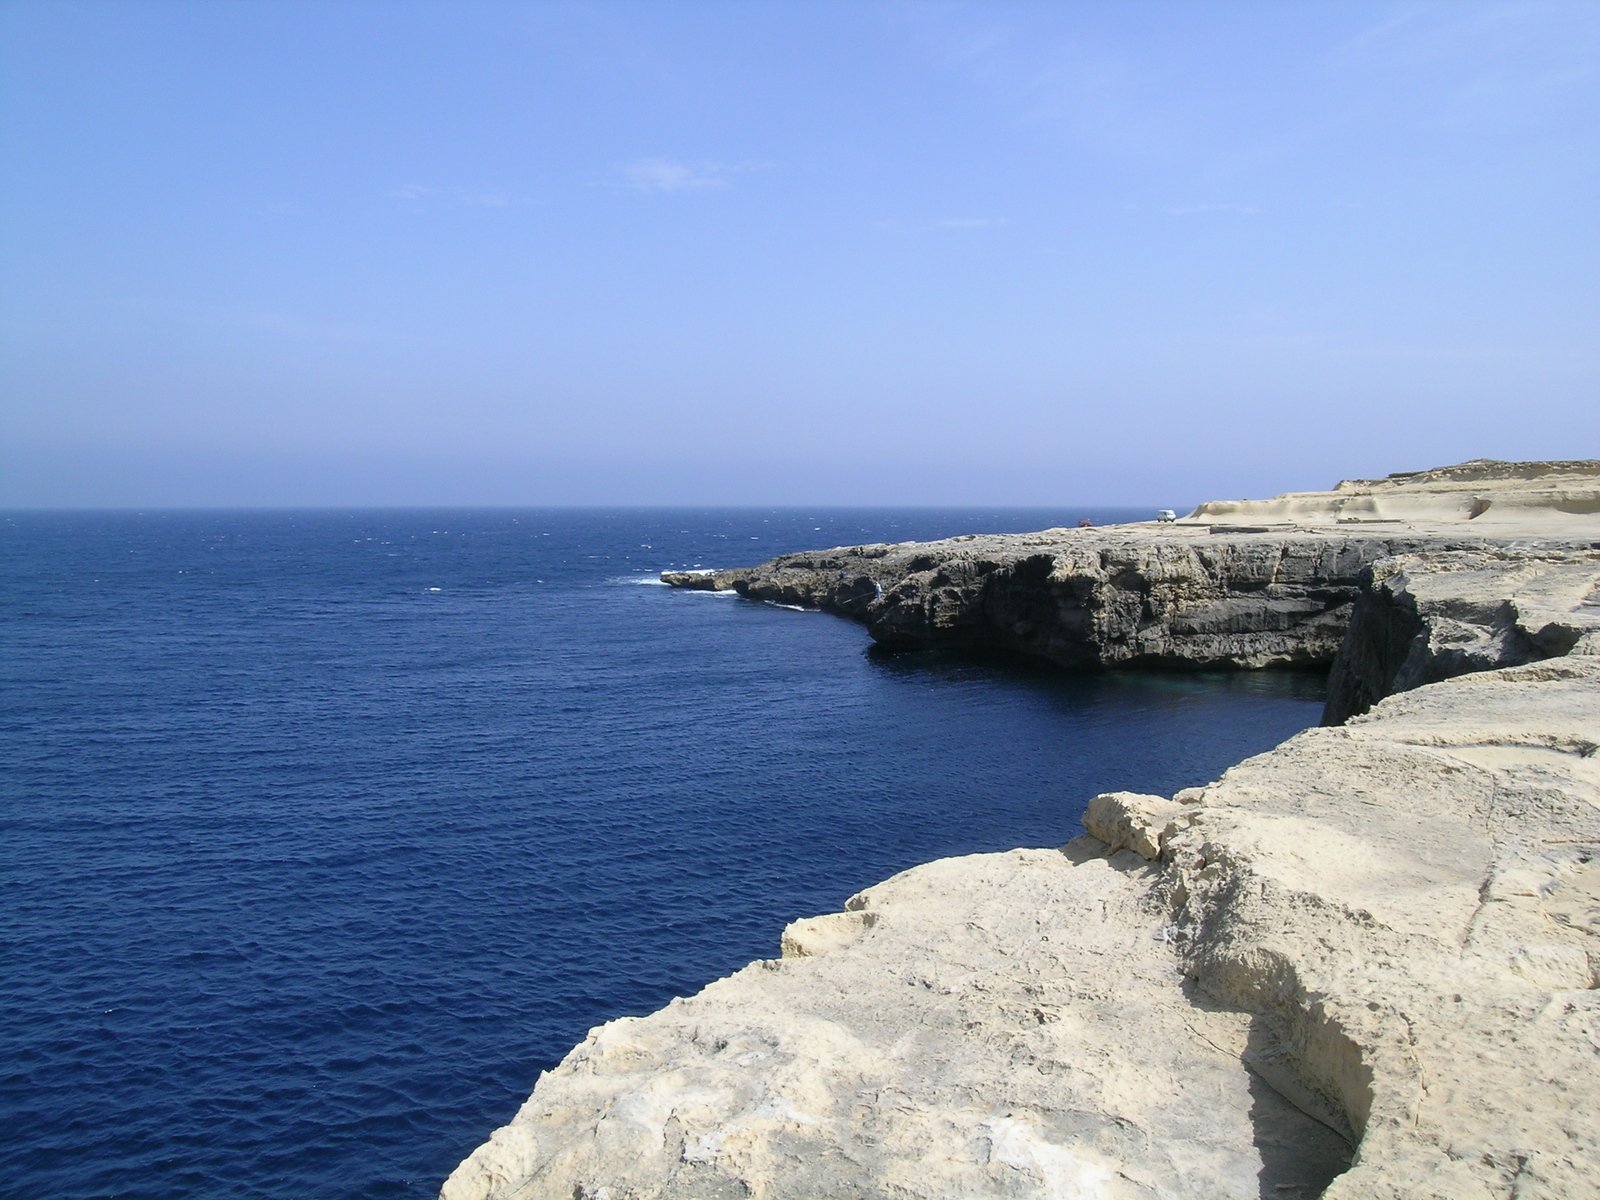 view of the ocean from a cliff side